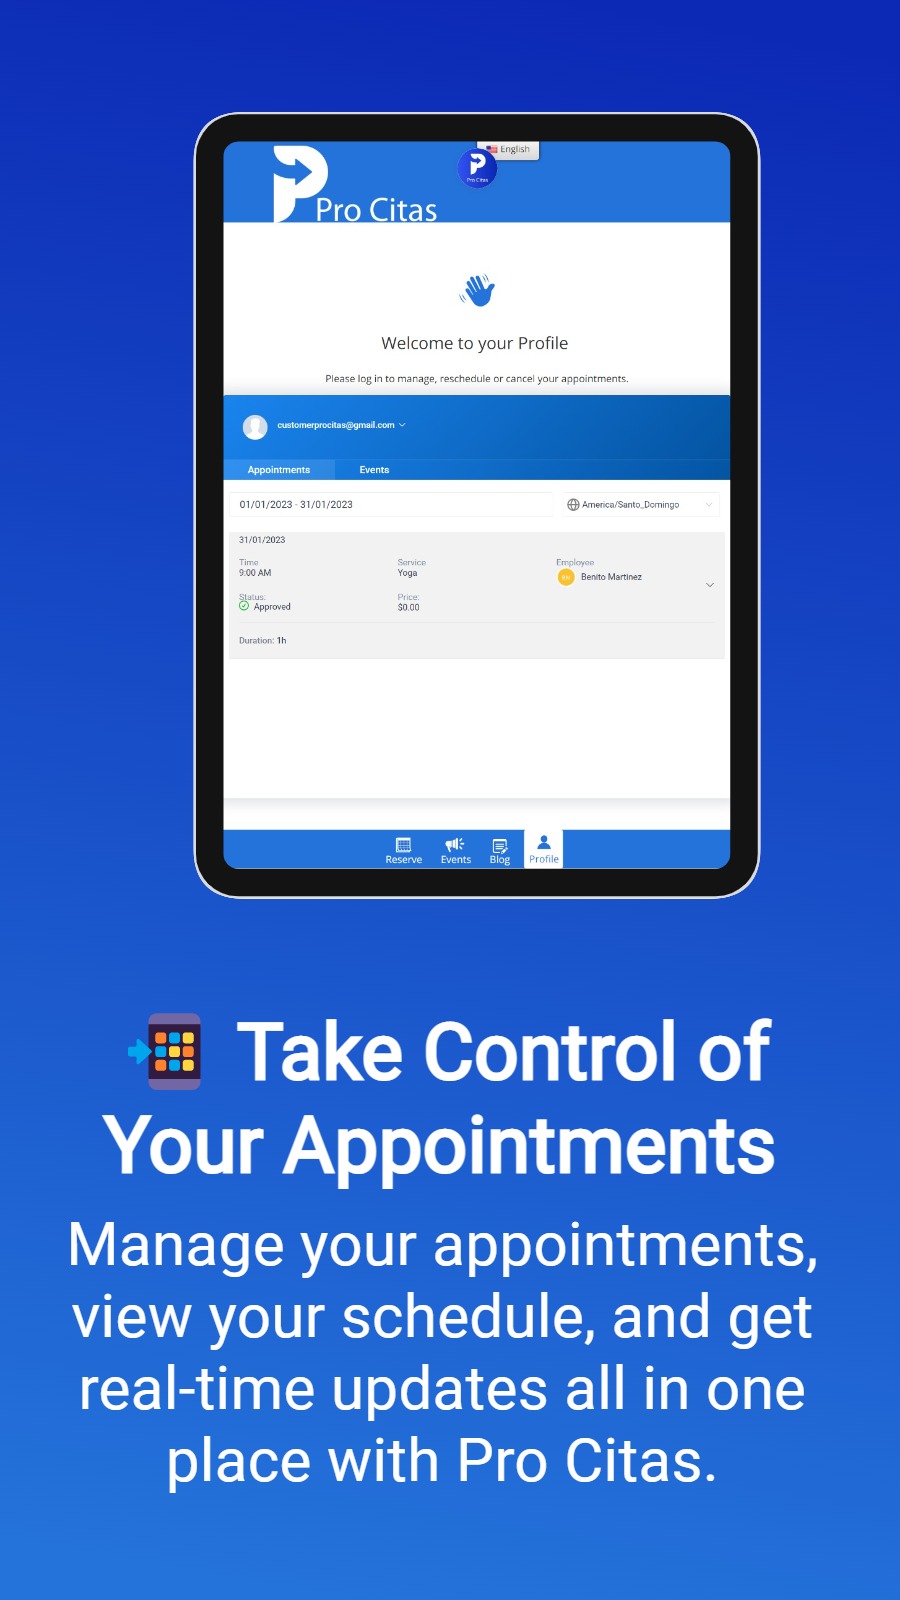 📲 Take Control of Your Appointments - Manage your appointments, view your schedule, and get real-time updates all in one place with Pro Citas.